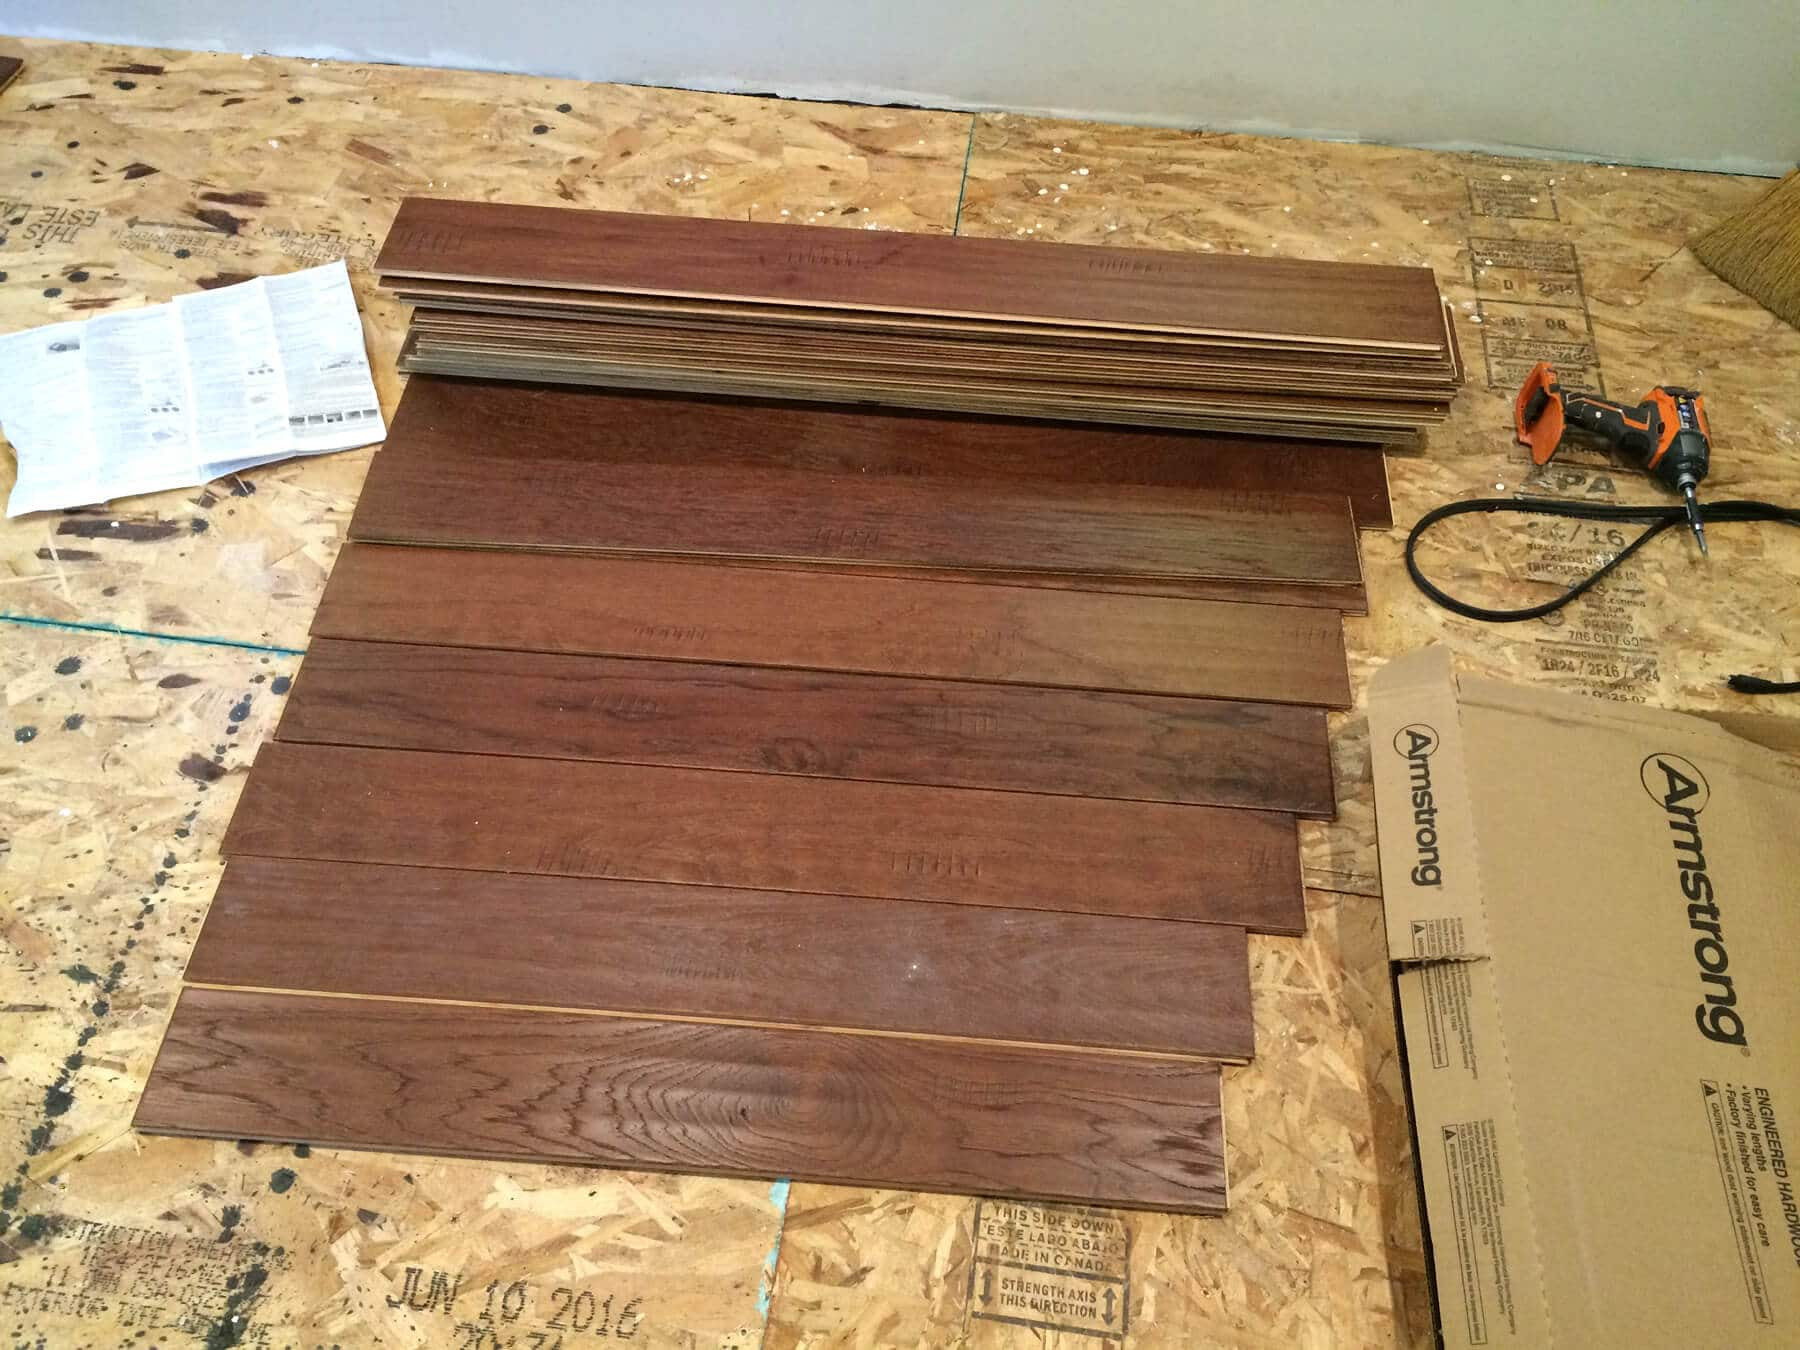 29 attractive Used Hardwood Floor Nailers for Sale 2024 free download used hardwood floor nailers for sale of the micro dwelling project part 5 flooring the daring gourmet with laying down the sub flooring was fine but honestly the thought of installing hardwo